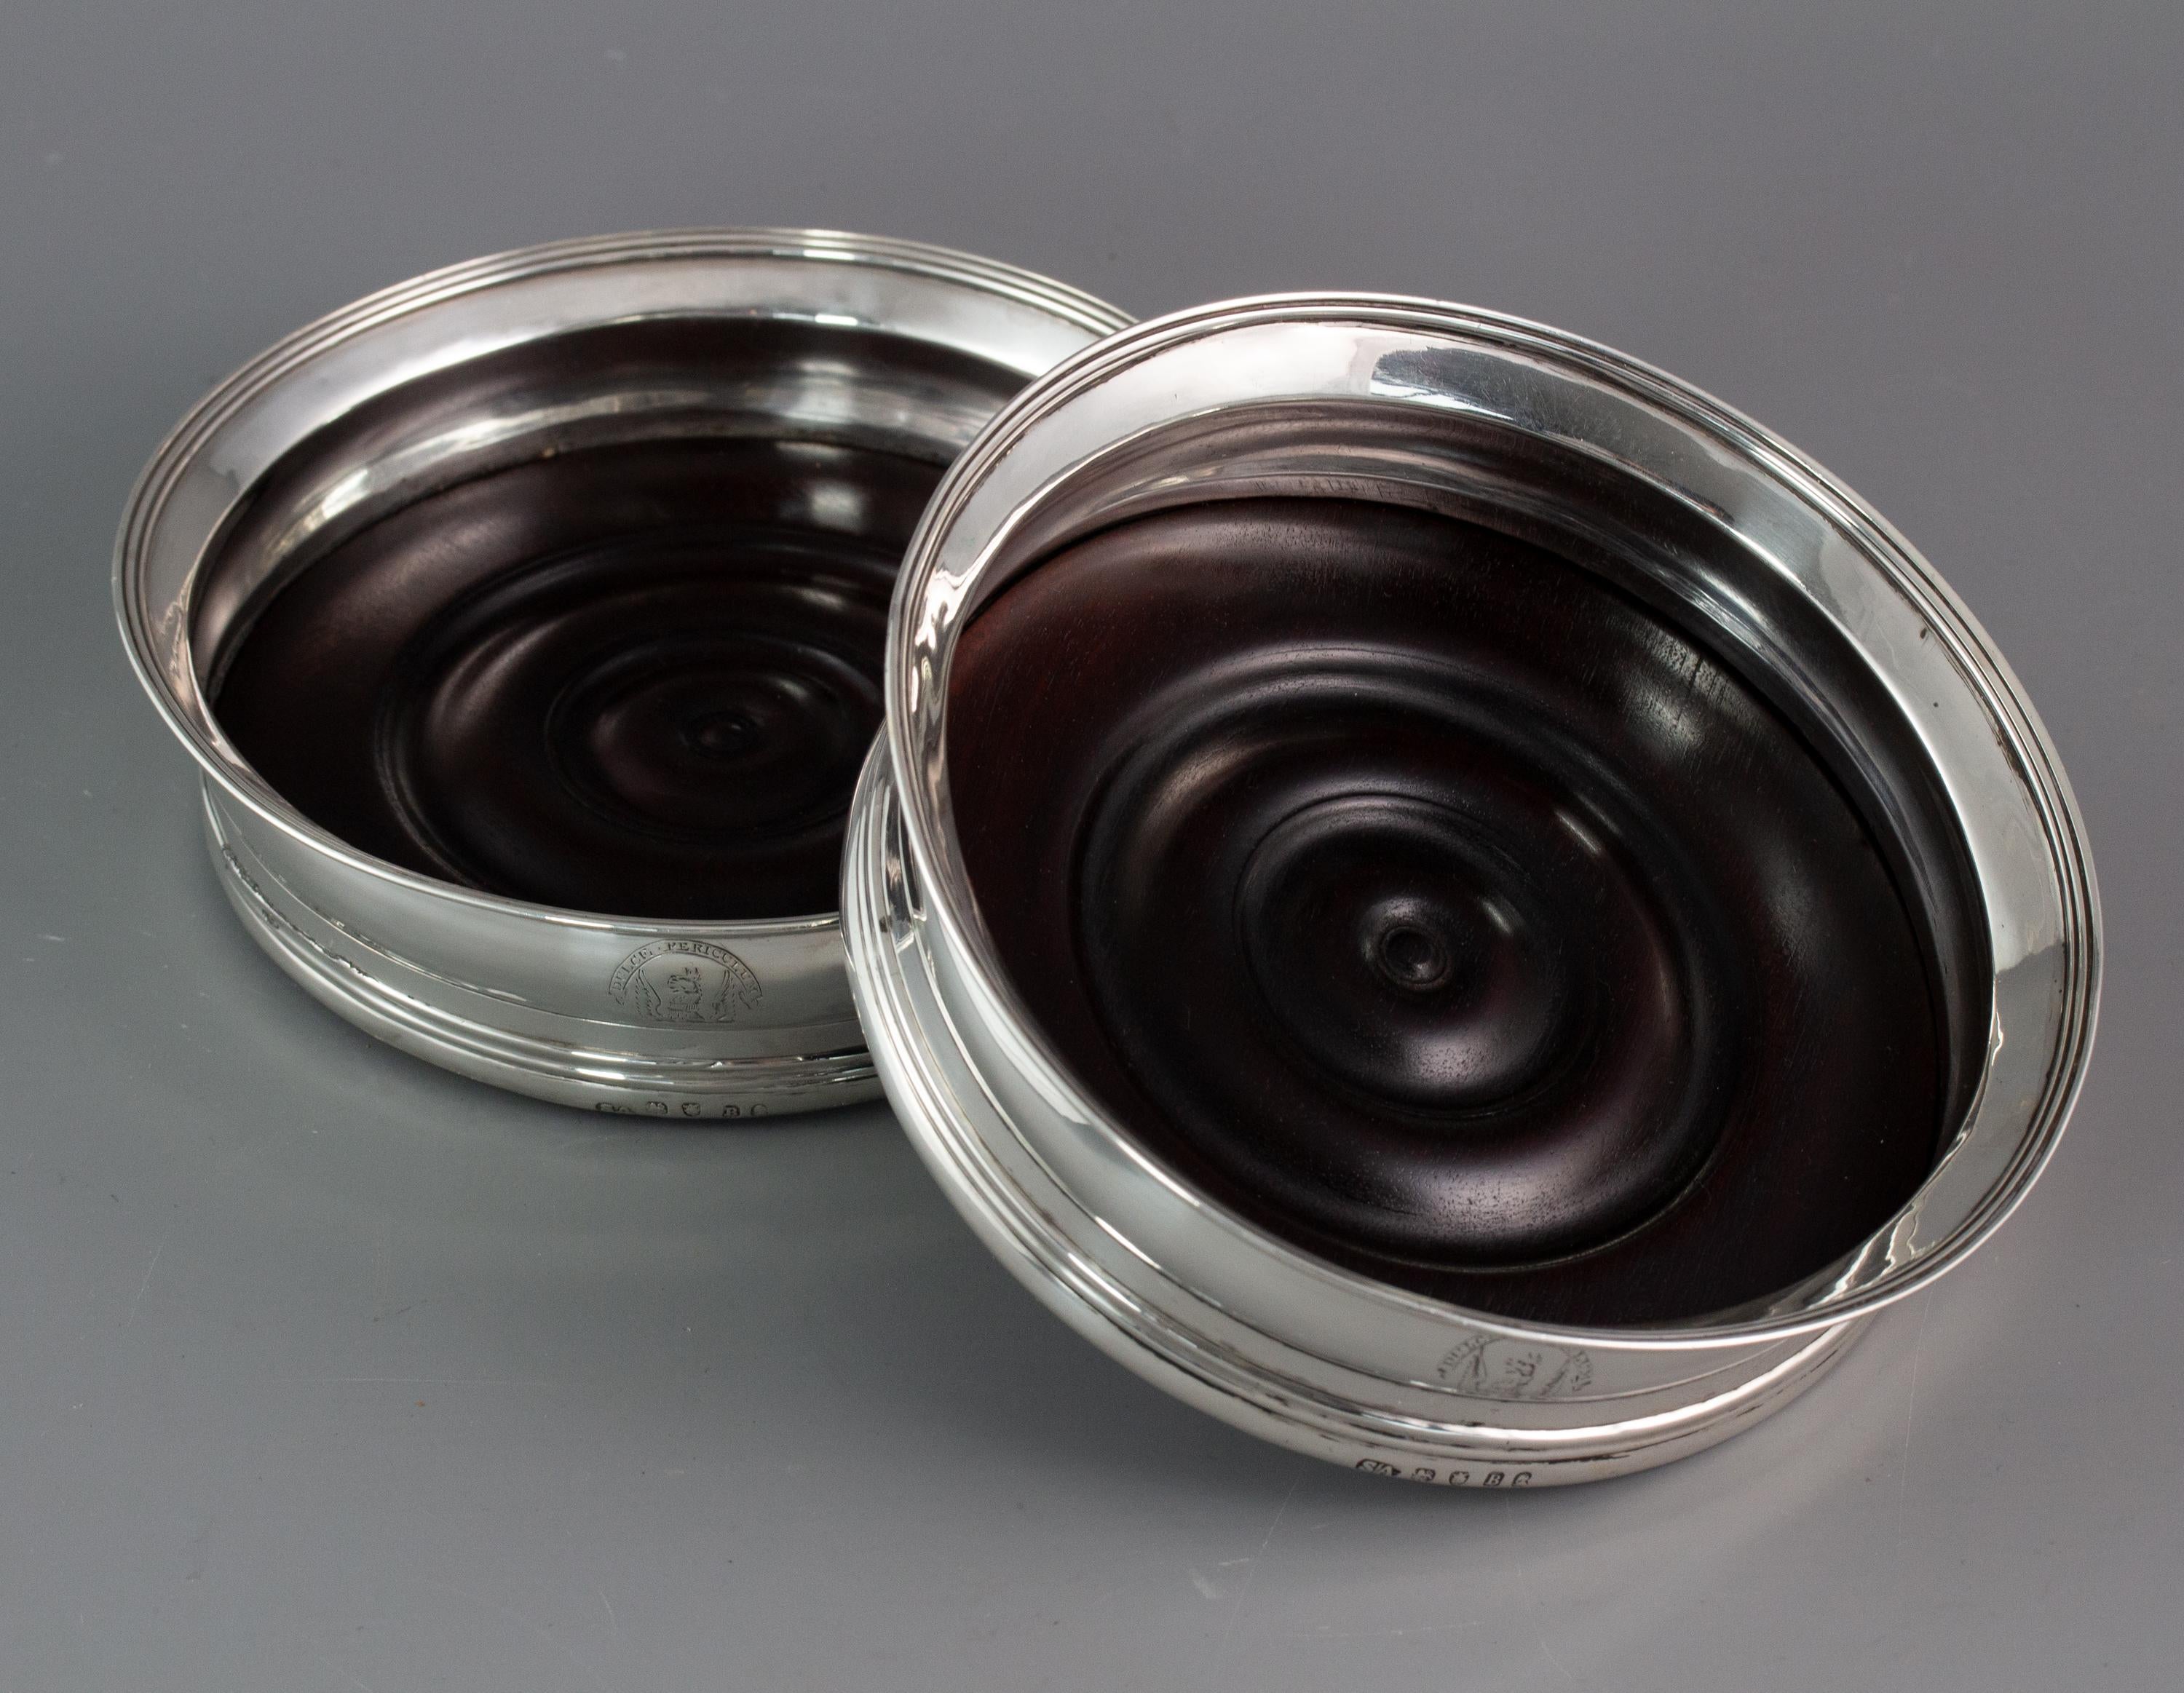 A very fine pair of George III silver wine coasters. The body of circular form with a reeded band to the base and a flared rim with a reeded border. Engraved to the side with a crest and motto “Dulce Periculum” which translates to “Danger is sweet”.